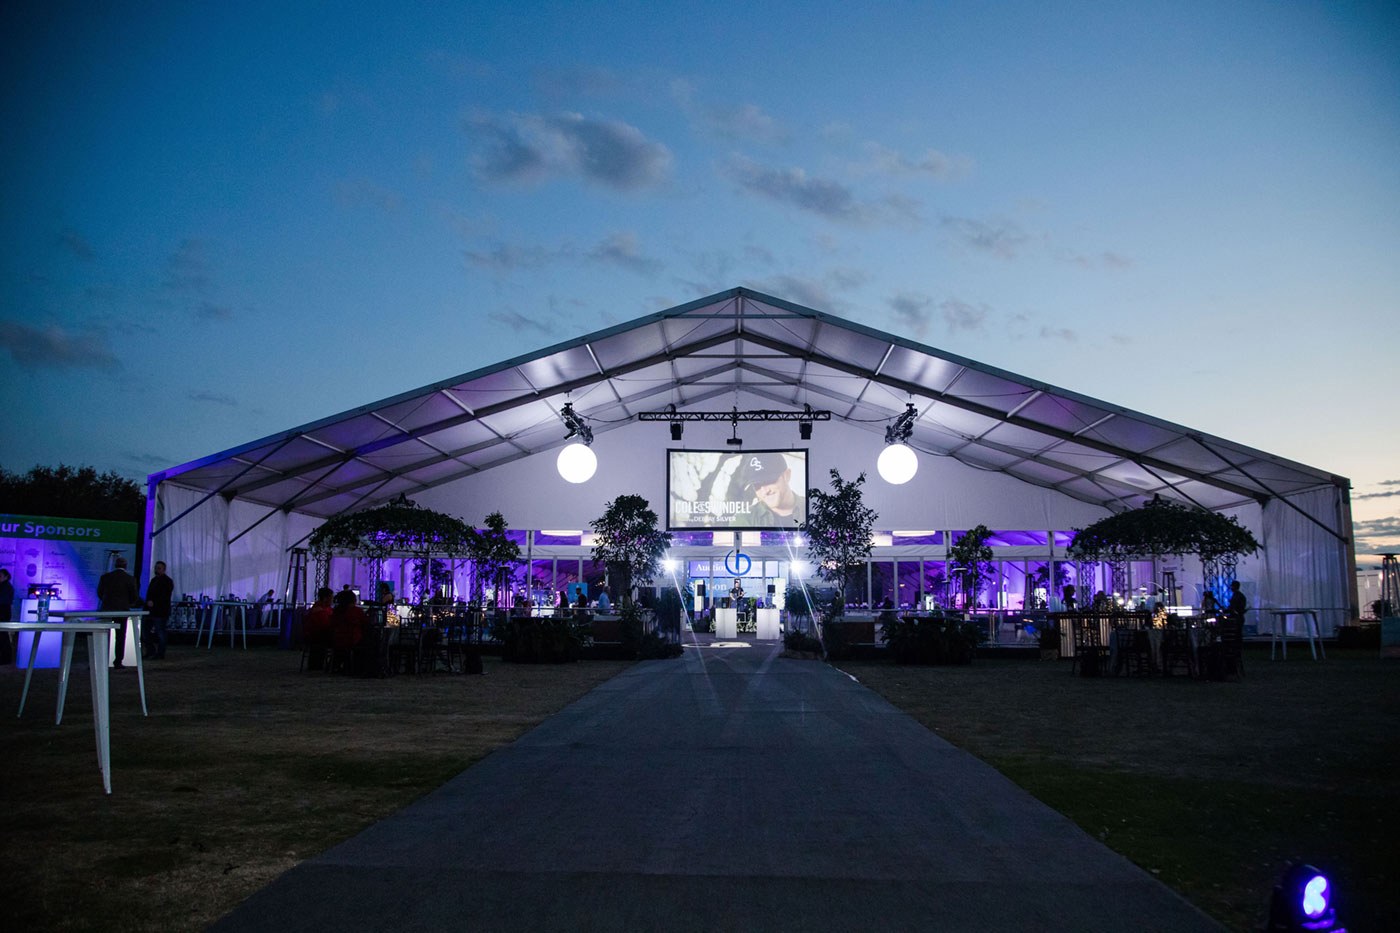 Image of large corporate event at night time